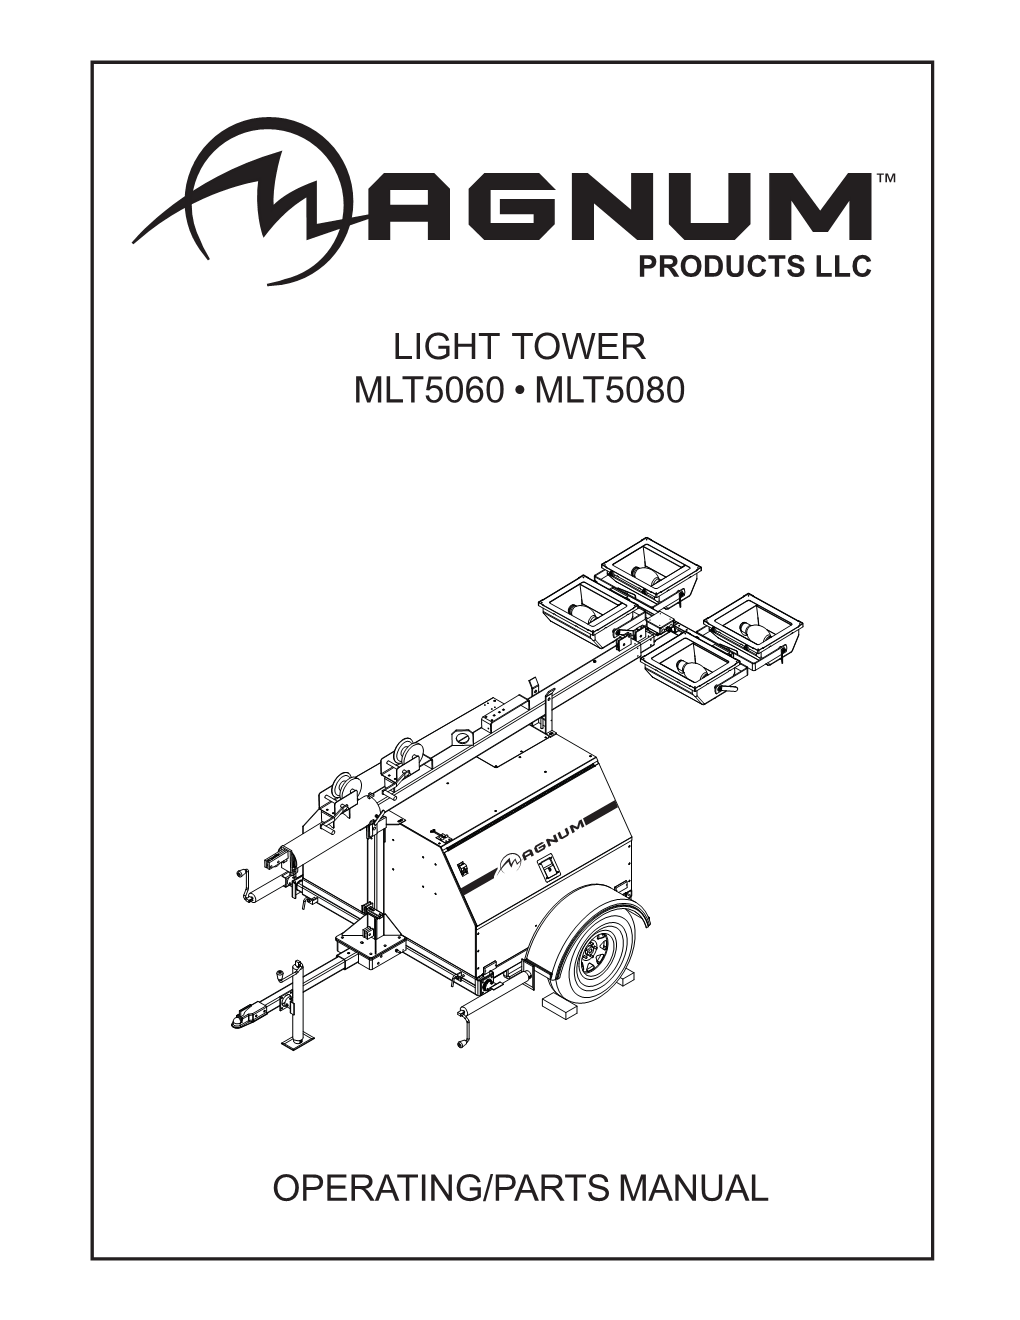 Light Tower Mlt5060 • Mlt5080 Operating/Parts Manual